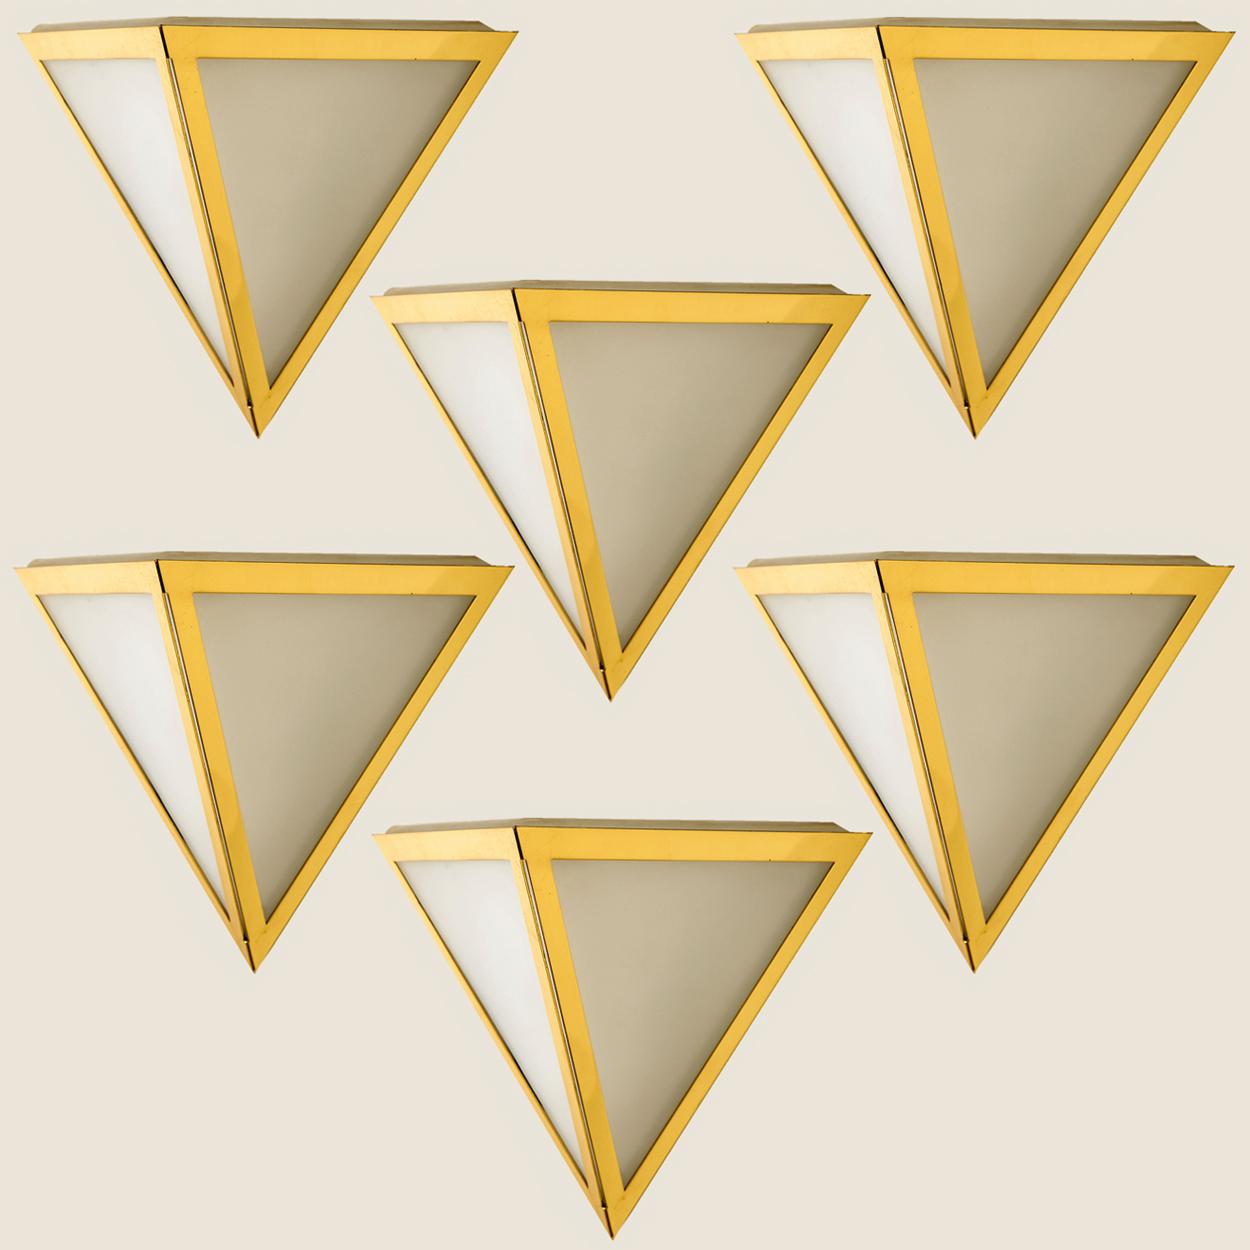 Triangle shaped wall lights in white opaline glass with brass details. Manufactured by Glashütte Limburg in Germany during the 1970s. (early 1970s). Nice craftsmanship. Minimal, geometric and simply shaped design.

Please note the price is for one